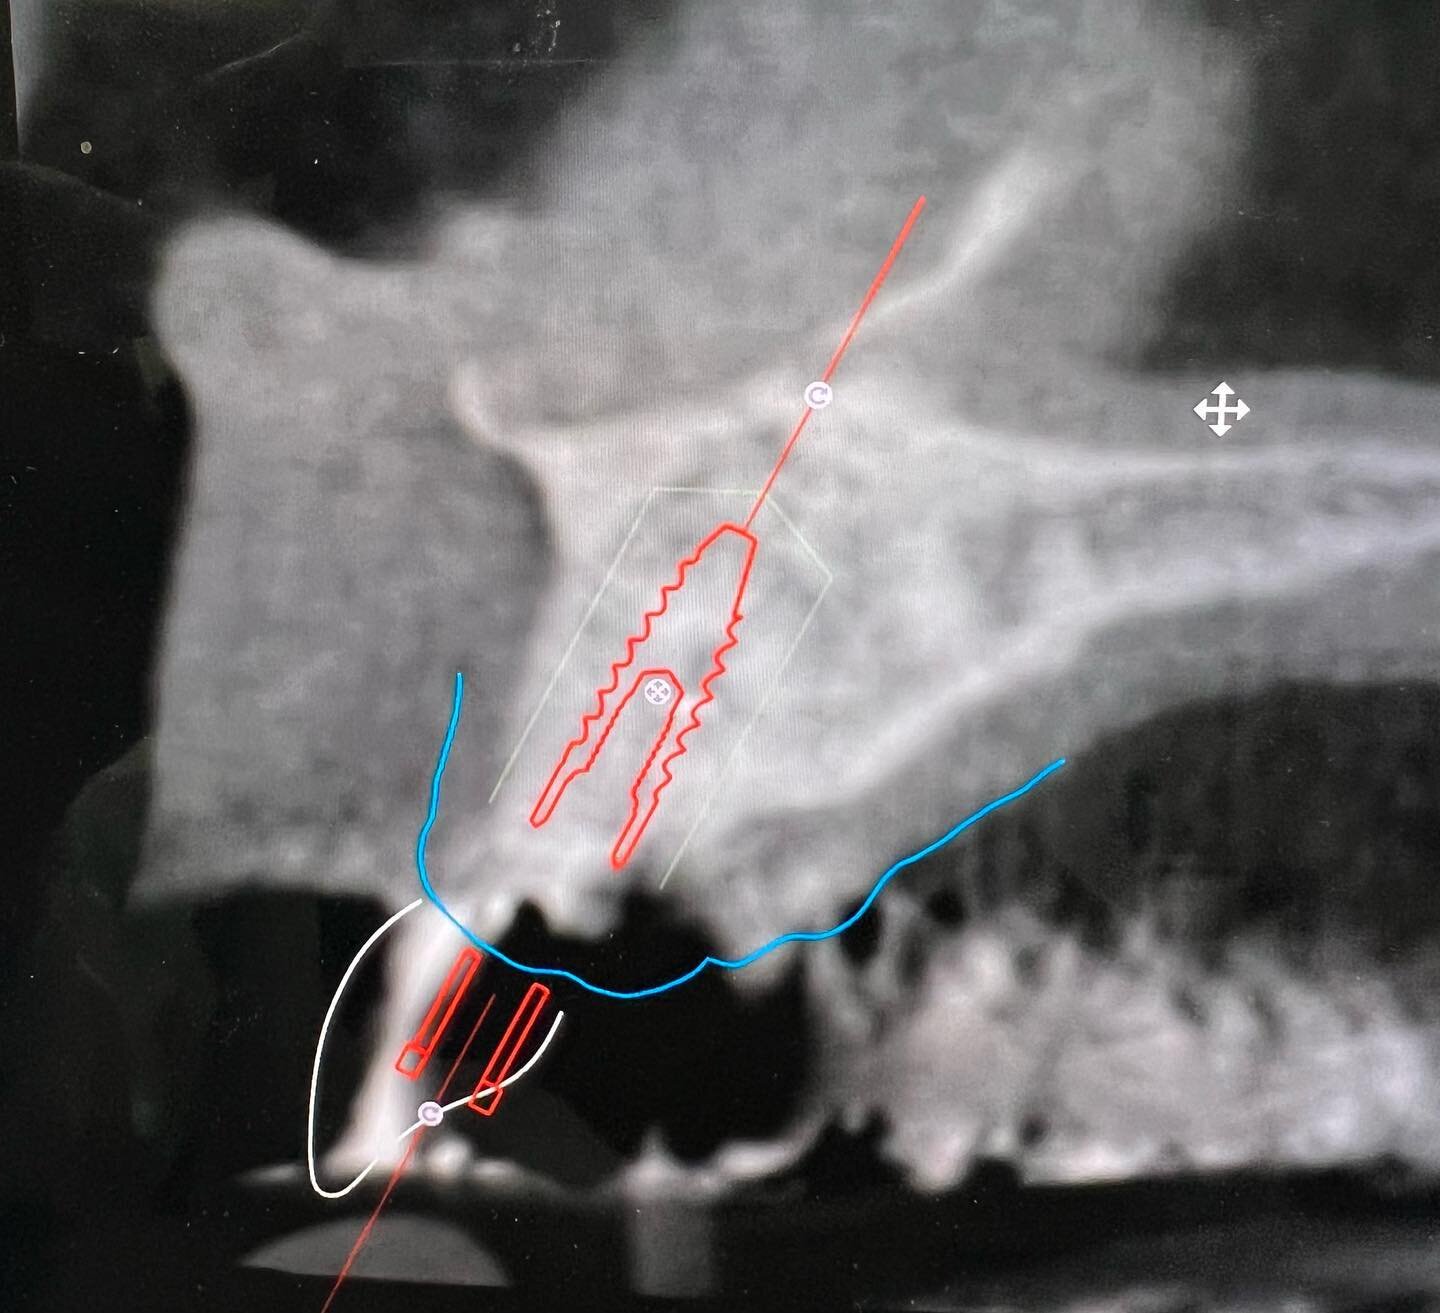 Implant planning is a 3 Dimensional approach.  By combining 3D cone beam scans with today&rsquo;s advanced digital software,  we can precisely plan and preselect the implant size before the surgery.
In this particular case, because of the location of